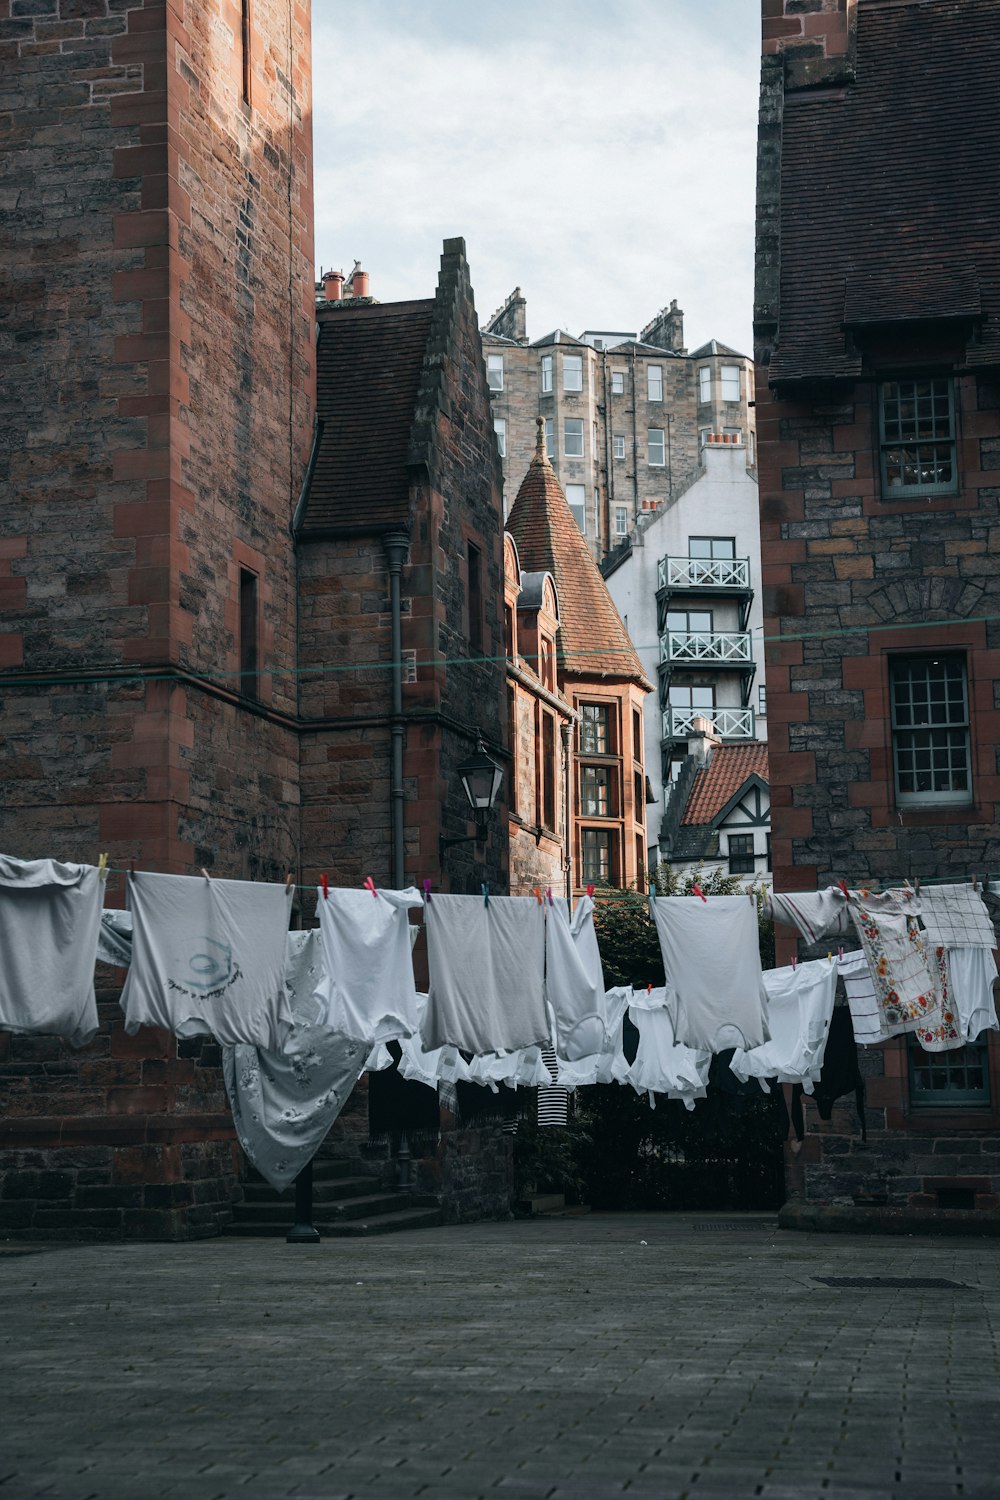 clothes hanging out to dry in front of a brick building